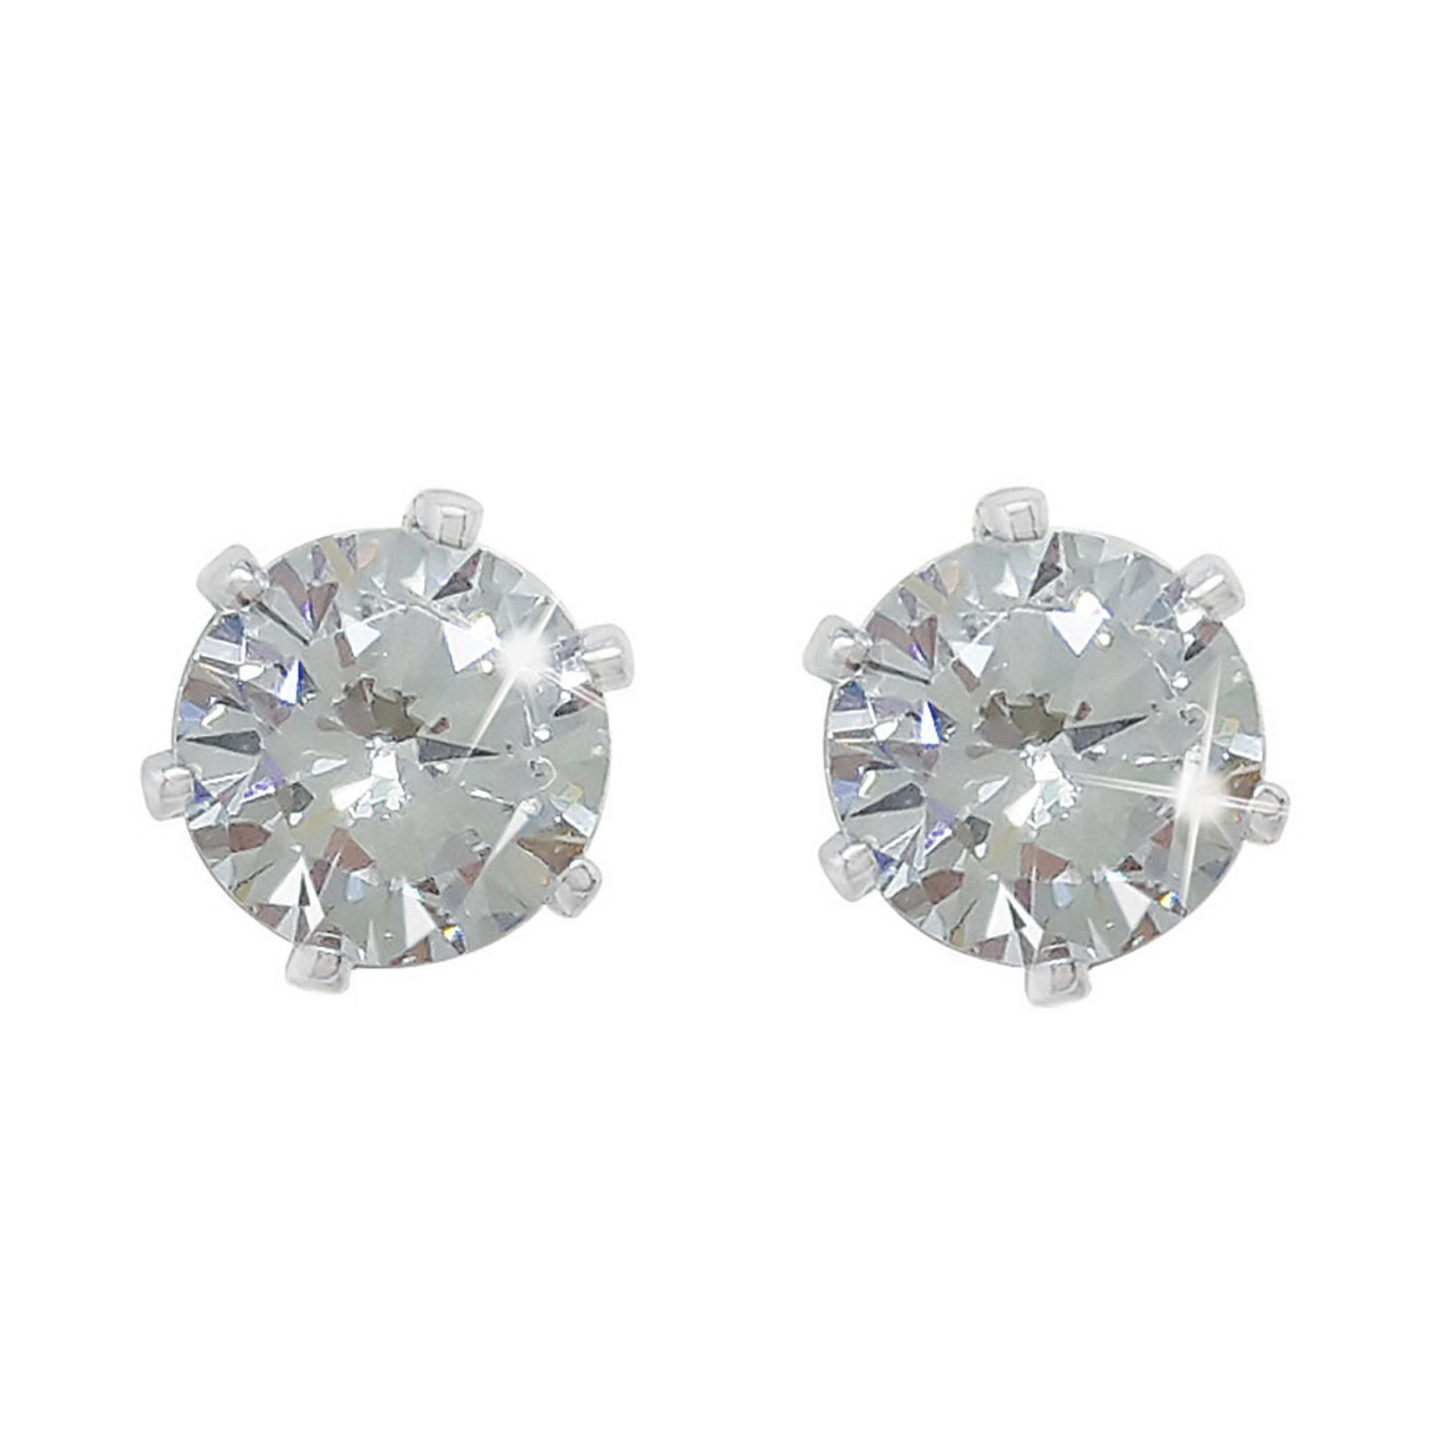 Tipperary Crystal Silver Stud Earrings Clear Stone 6Mm